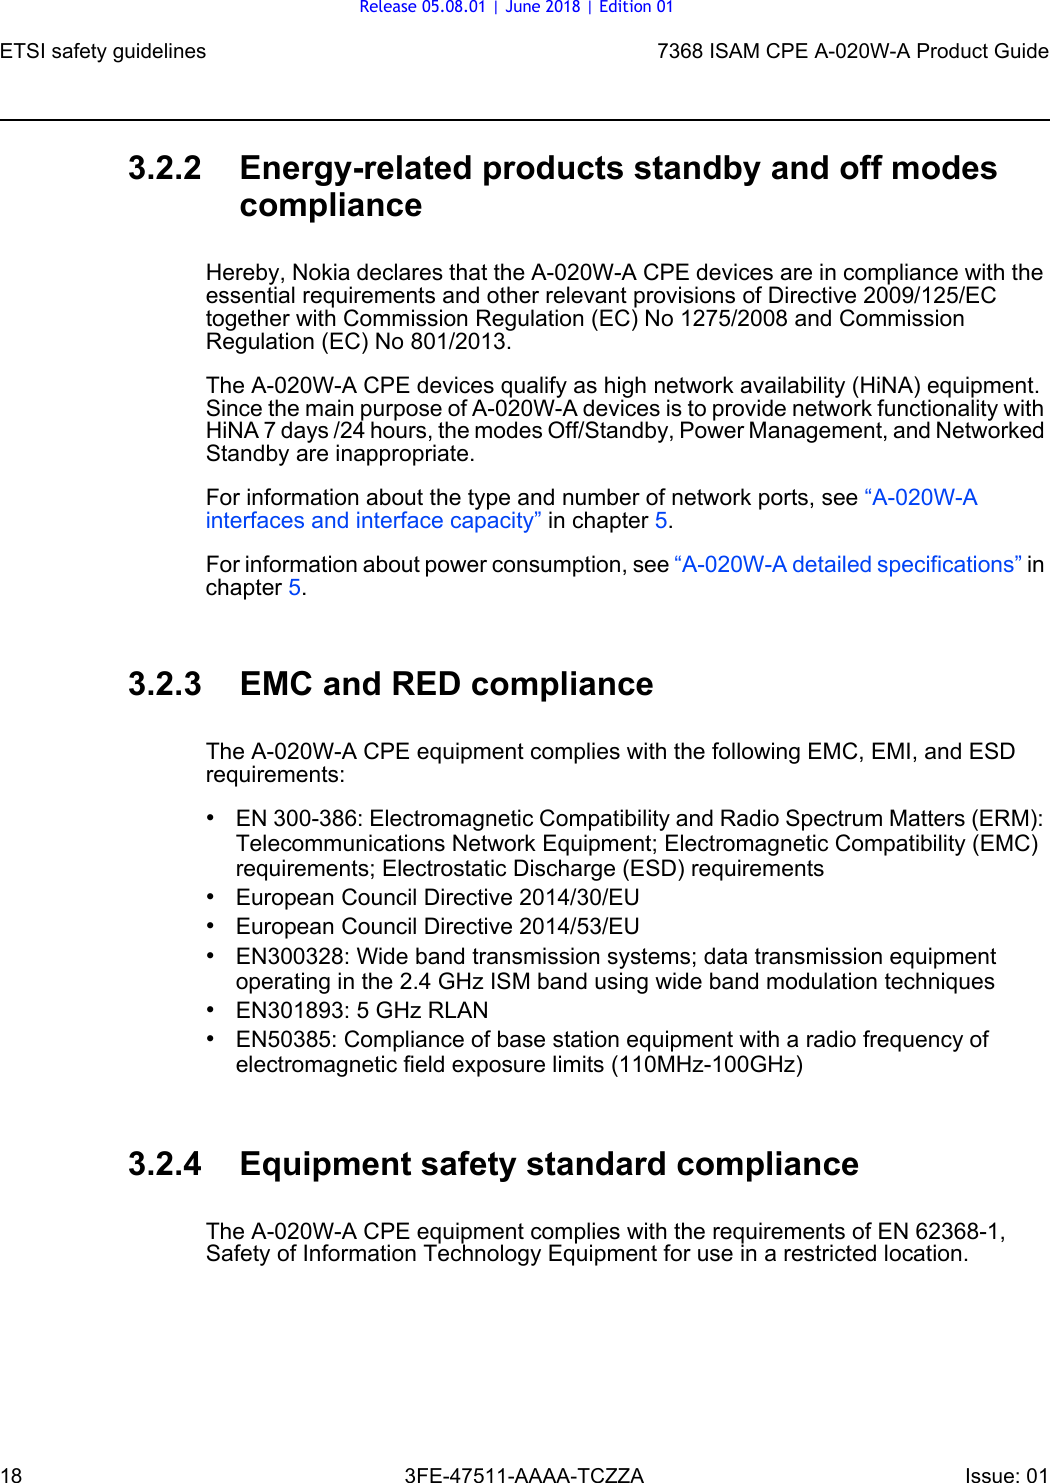 ETSI safety guidelines187368 ISAM CPE A-020W-A Product Guide3FE-47511-AAAA-TCZZA Issue: 01 3.2.2 Energy-related products standby and off modes complianceHereby, Nokia declares that the A-020W-A CPE devices are in compliance with the essential requirements and other relevant provisions of Directive 2009/125/EC together with Commission Regulation (EC) No 1275/2008 and Commission Regulation (EC) No 801/2013. The A-020W-A CPE devices qualify as high network availability (HiNA) equipment. Since the main purpose of A-020W-A devices is to provide network functionality with HiNA 7 days /24 hours, the modes Off/Standby, Power Management, and Networked Standby are inappropriate.For information about the type and number of network ports, see “A-020W-A interfaces and interface capacity” in chapter 5.For information about power consumption, see “A-020W-A detailed specifications” in chapter 5.3.2.3 EMC and RED complianceThe A-020W-A CPE equipment complies with the following EMC, EMI, and ESD requirements:•EN 300-386: Electromagnetic Compatibility and Radio Spectrum Matters (ERM): Telecommunications Network Equipment; Electromagnetic Compatibility (EMC) requirements; Electrostatic Discharge (ESD) requirements•European Council Directive 2014/30/EU•European Council Directive 2014/53/EU•EN300328: Wide band transmission systems; data transmission equipment operating in the 2.4 GHz ISM band using wide band modulation techniques•EN301893: 5 GHz RLAN•EN50385: Compliance of base station equipment with a radio frequency of electromagnetic field exposure limits (110MHz-100GHz)3.2.4 Equipment safety standard complianceThe A-020W-A CPE equipment complies with the requirements of EN 62368-1, Safety of Information Technology Equipment for use in a restricted location.Release 05.08.01 | June 2018 | Edition 01